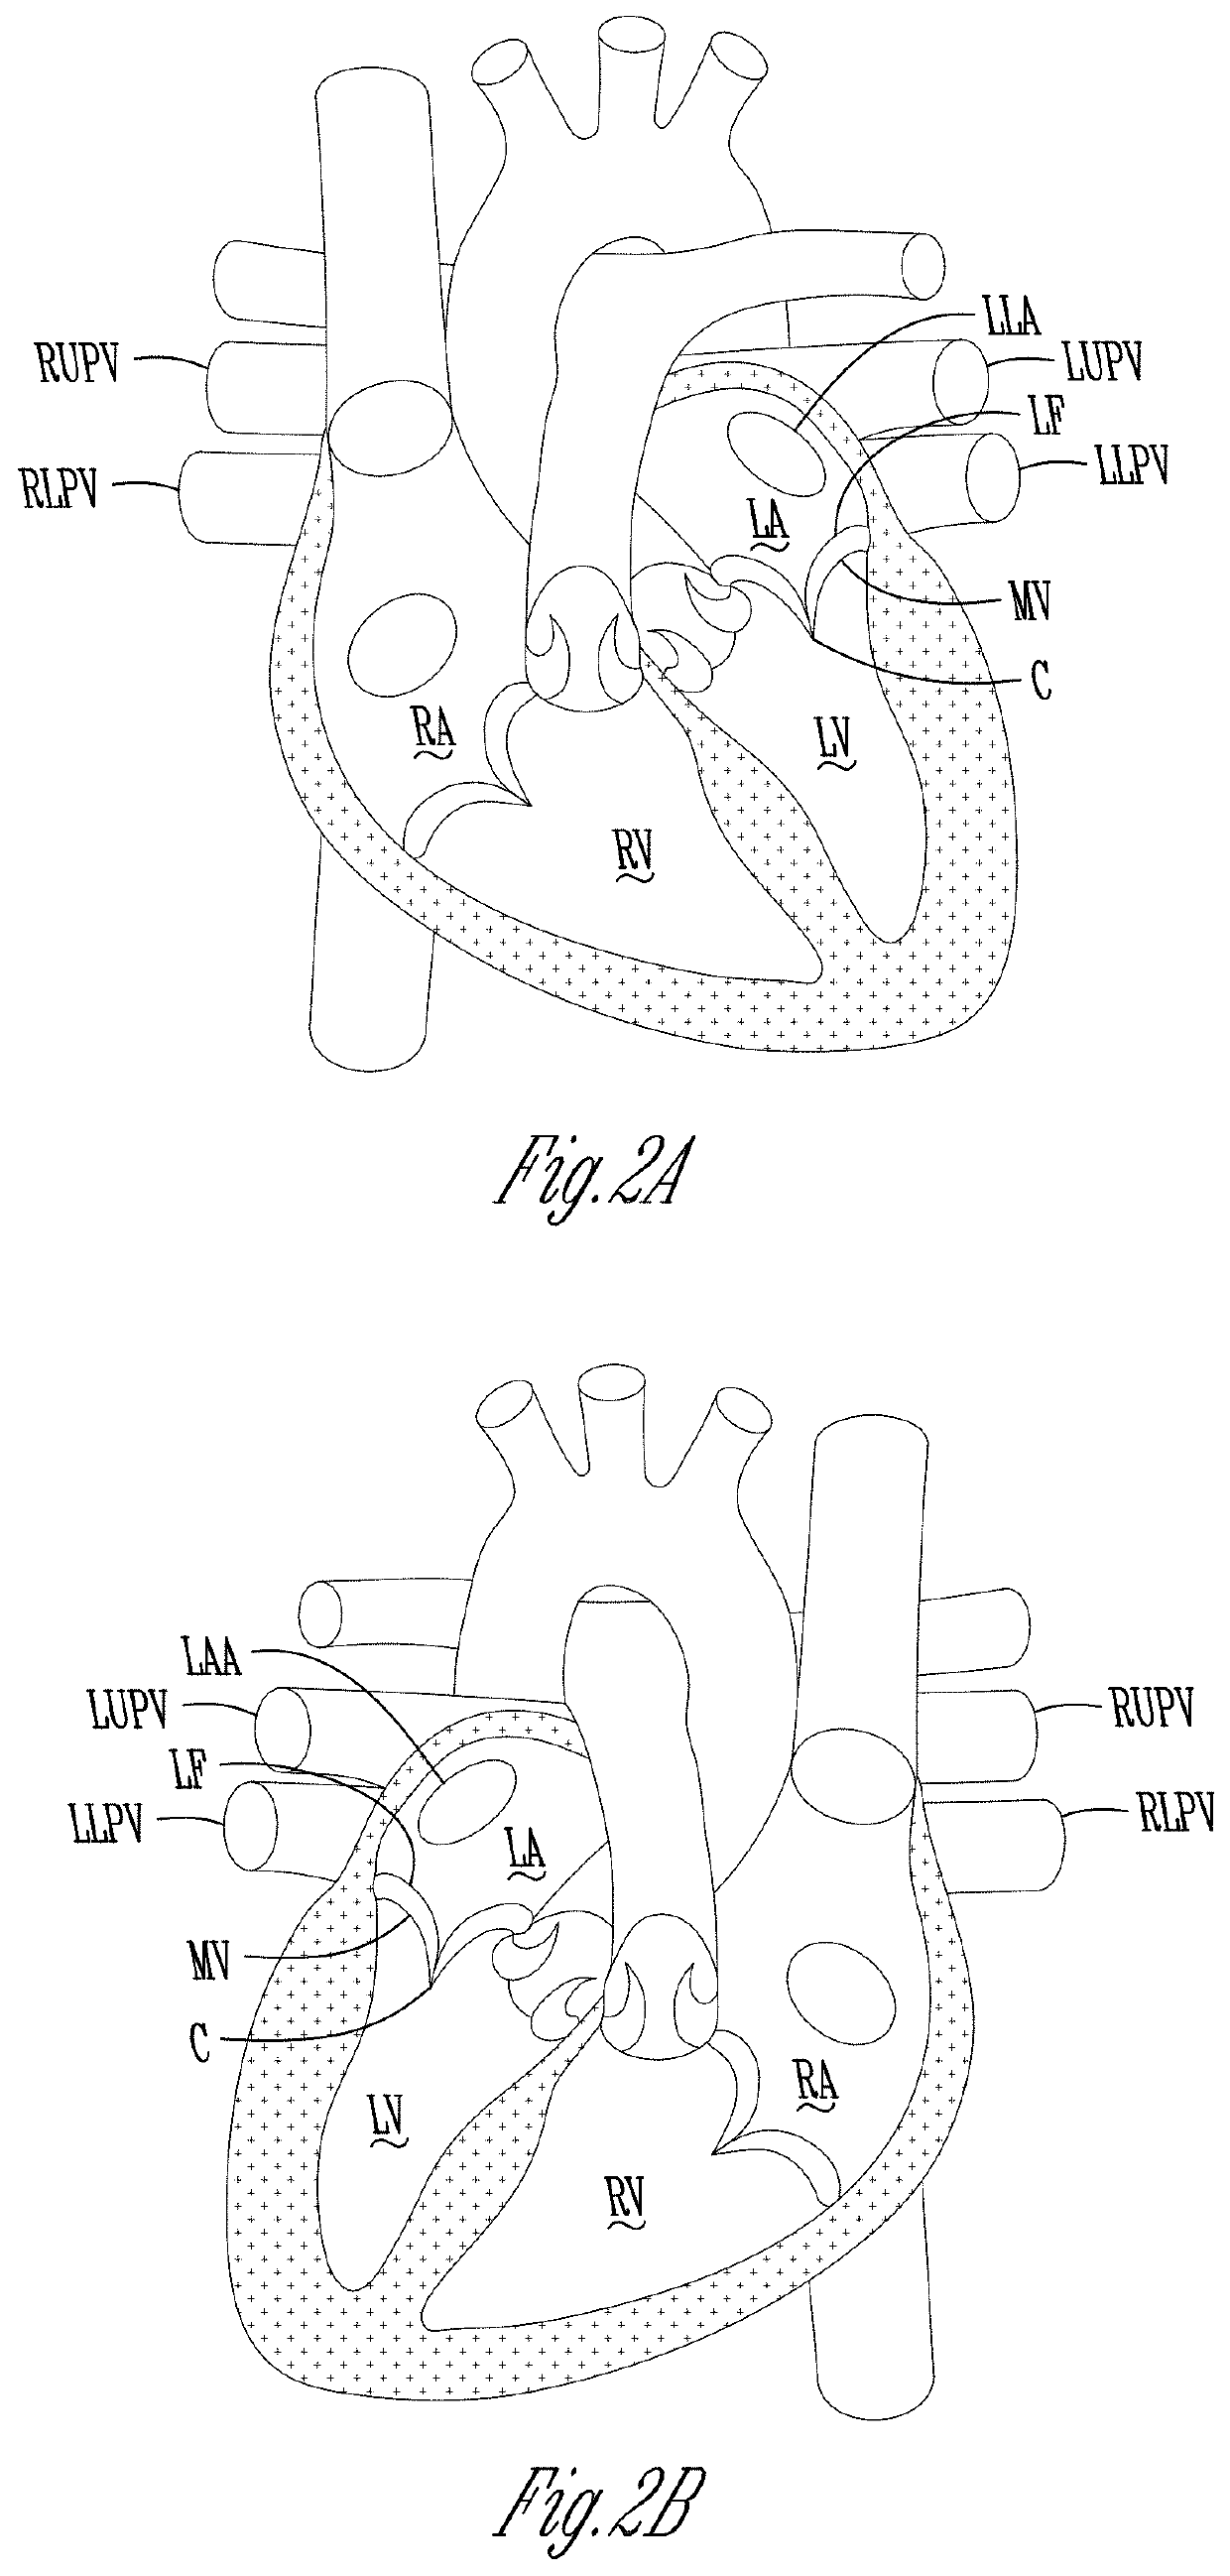 Devices, systems and methods for cardiac treatment